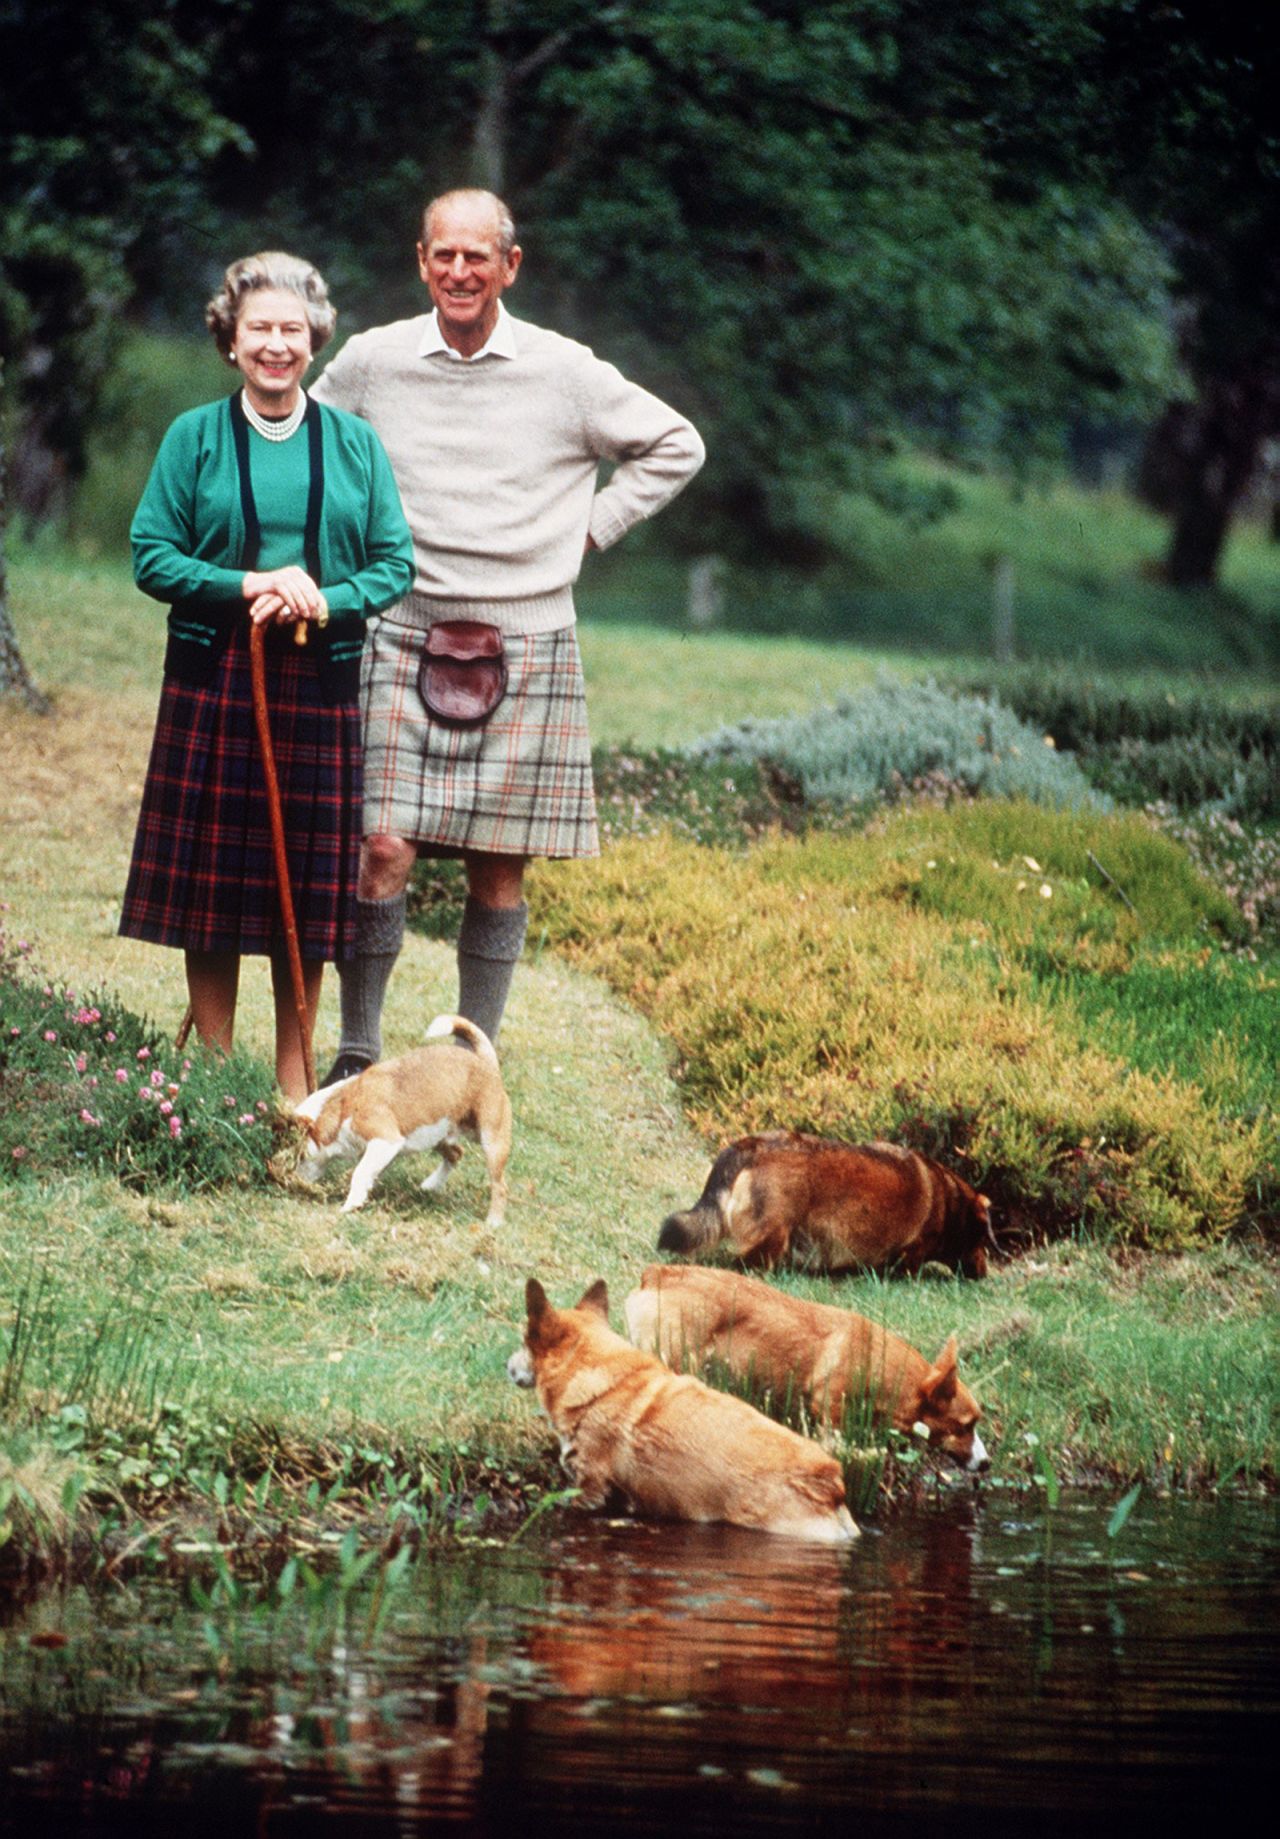 The Queen and Prince Philip pose for a photo in 1994.